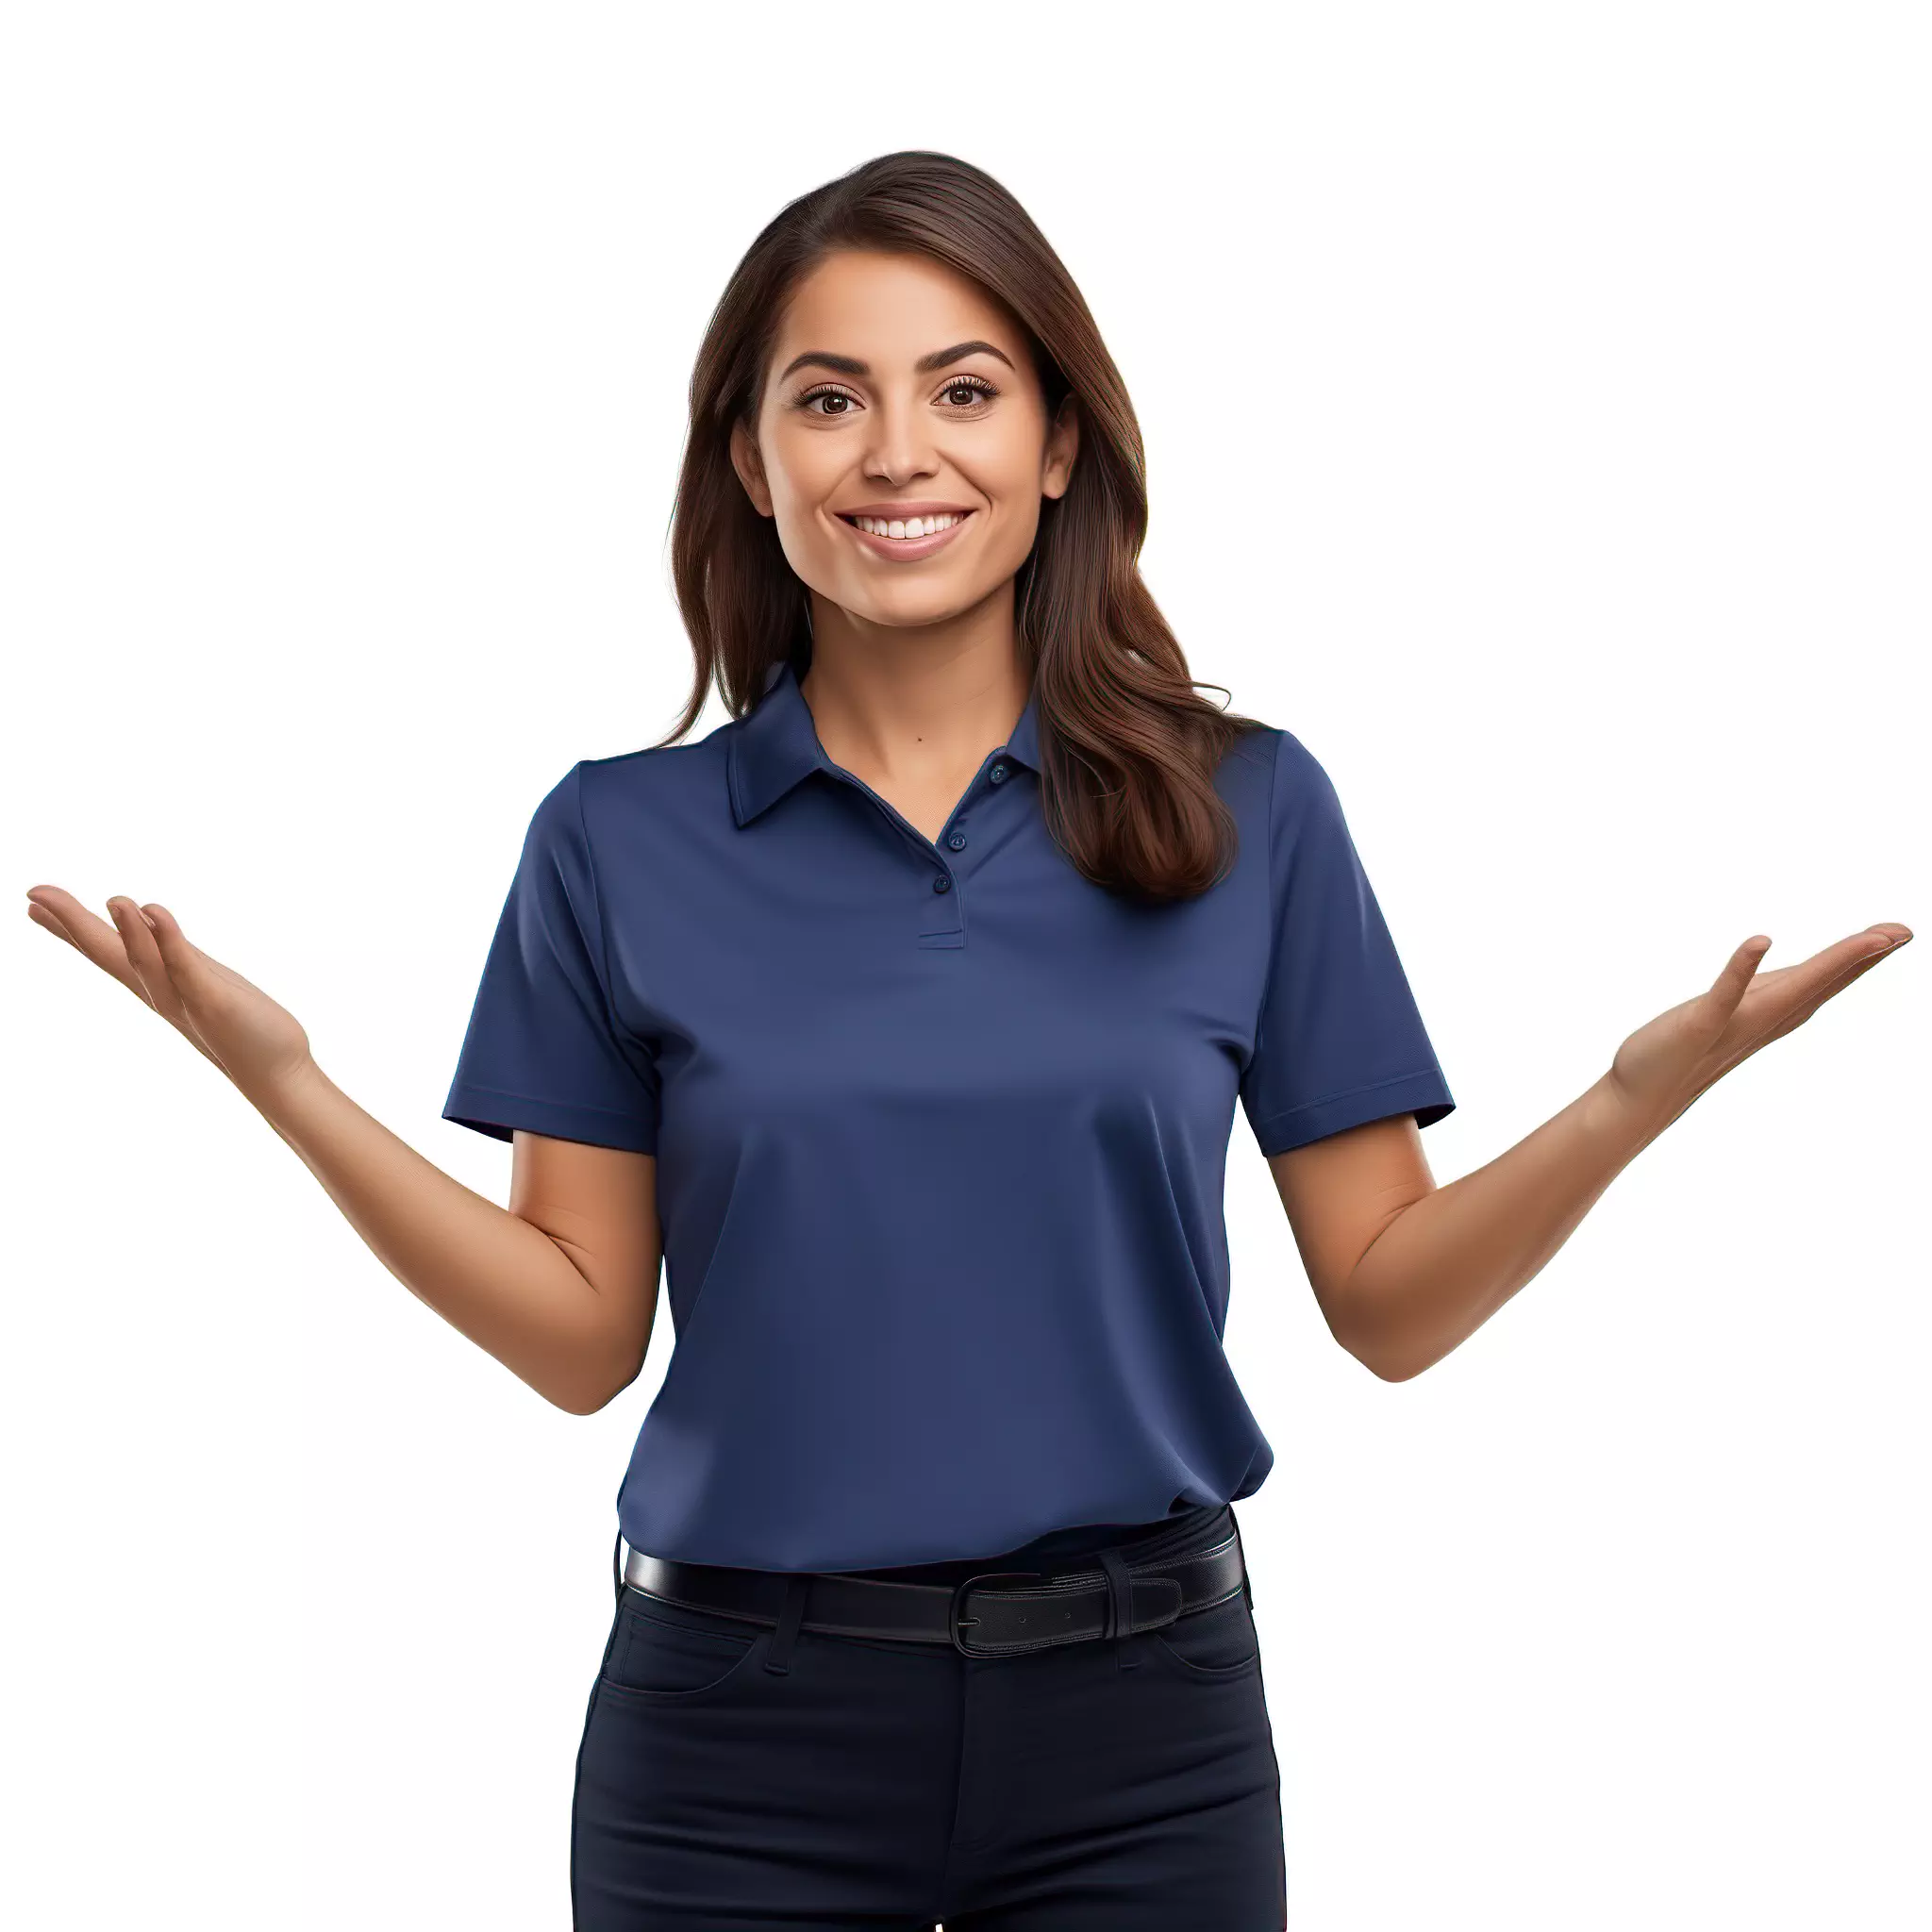 A woman wearing a blue polo shirt with ERROR 404 her hands outstretched.